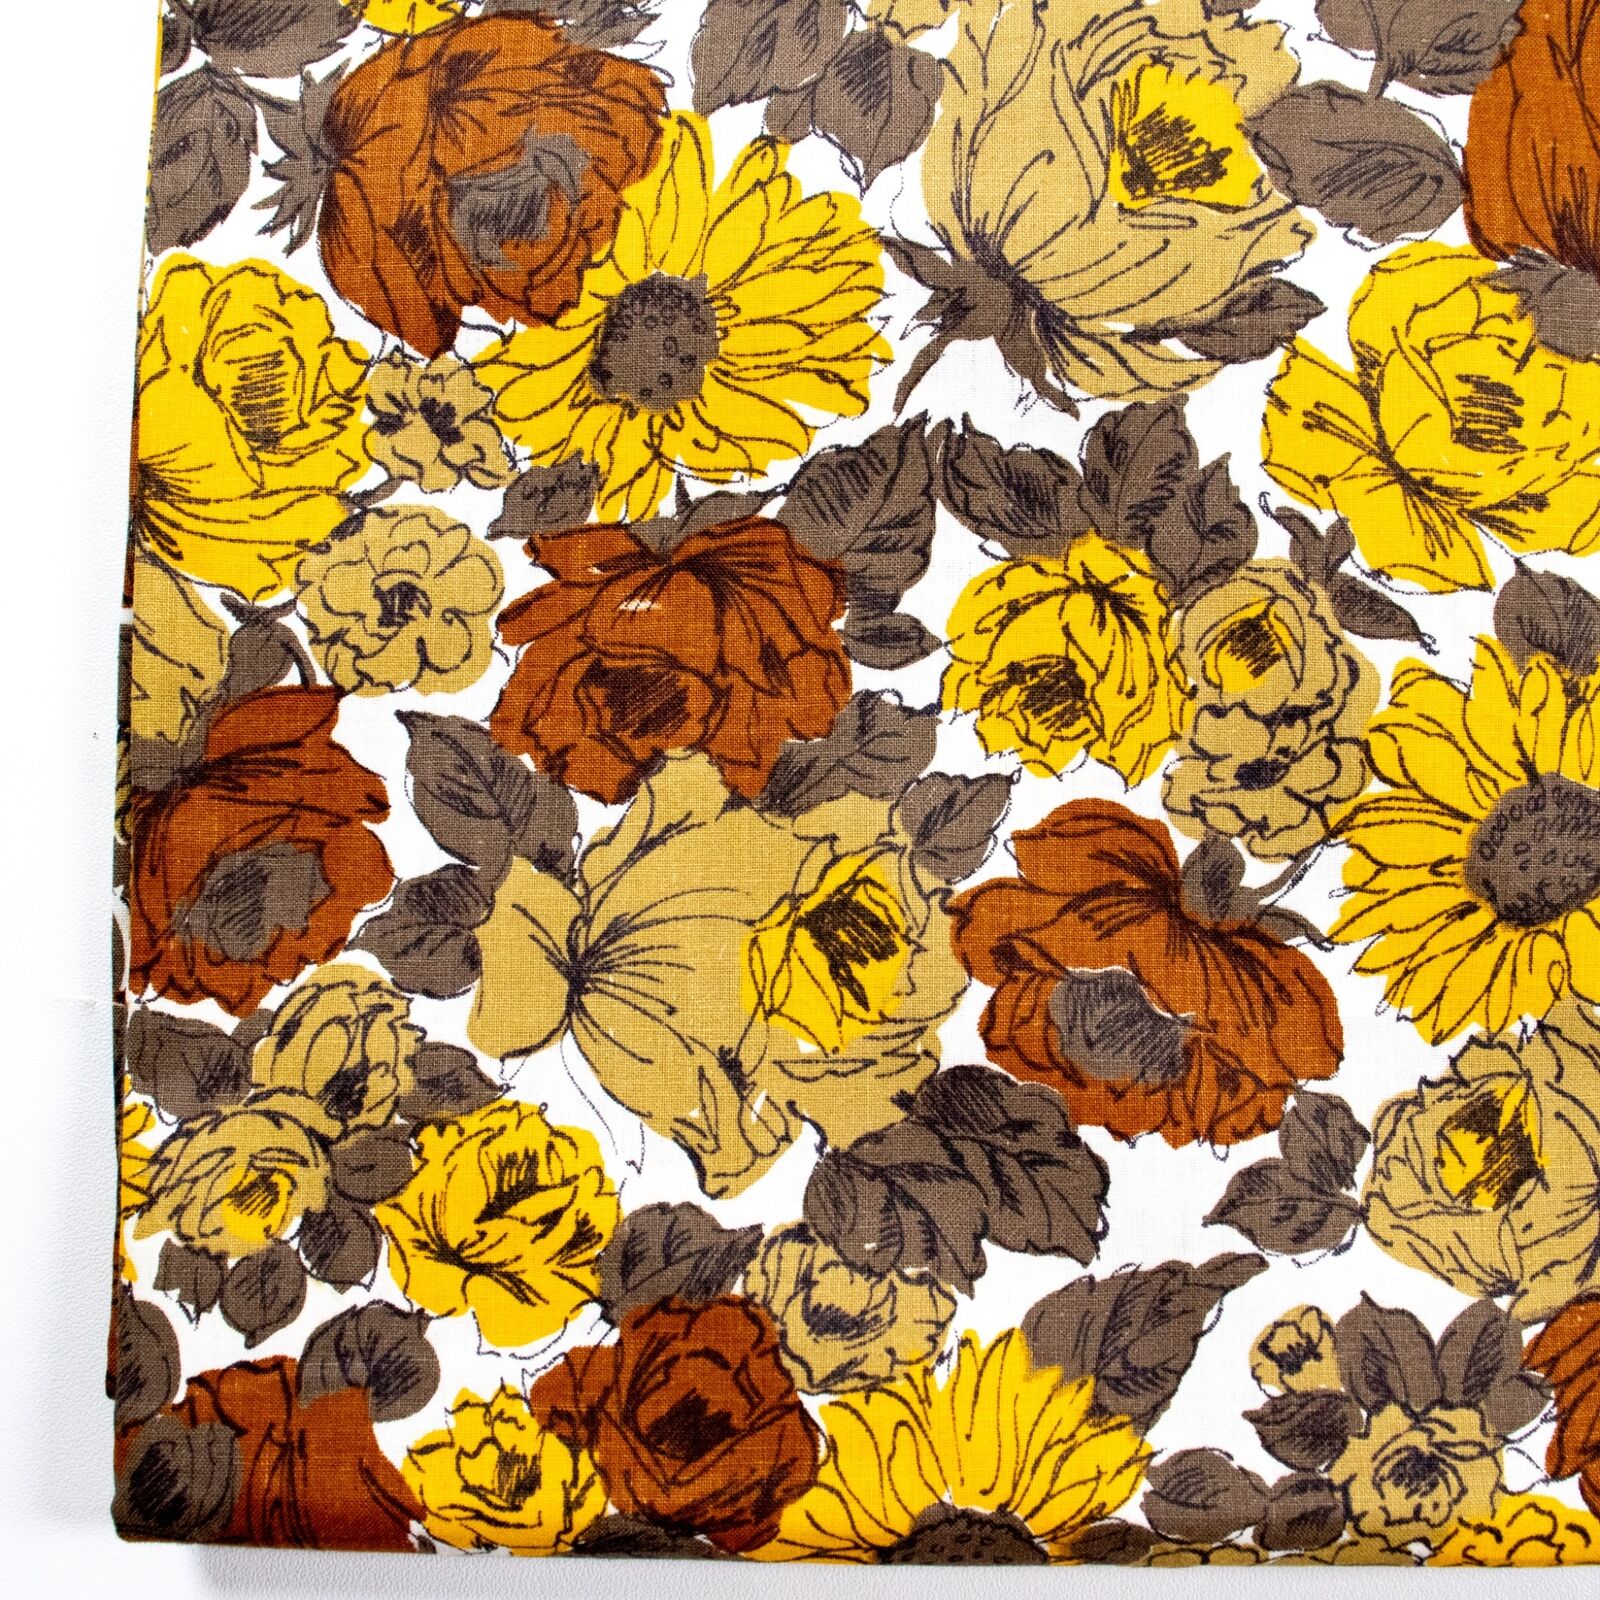 Vtg Cotton Fabric 1960s Yellow Brown Roses 5 Yards Floral Dressmaking Yardage